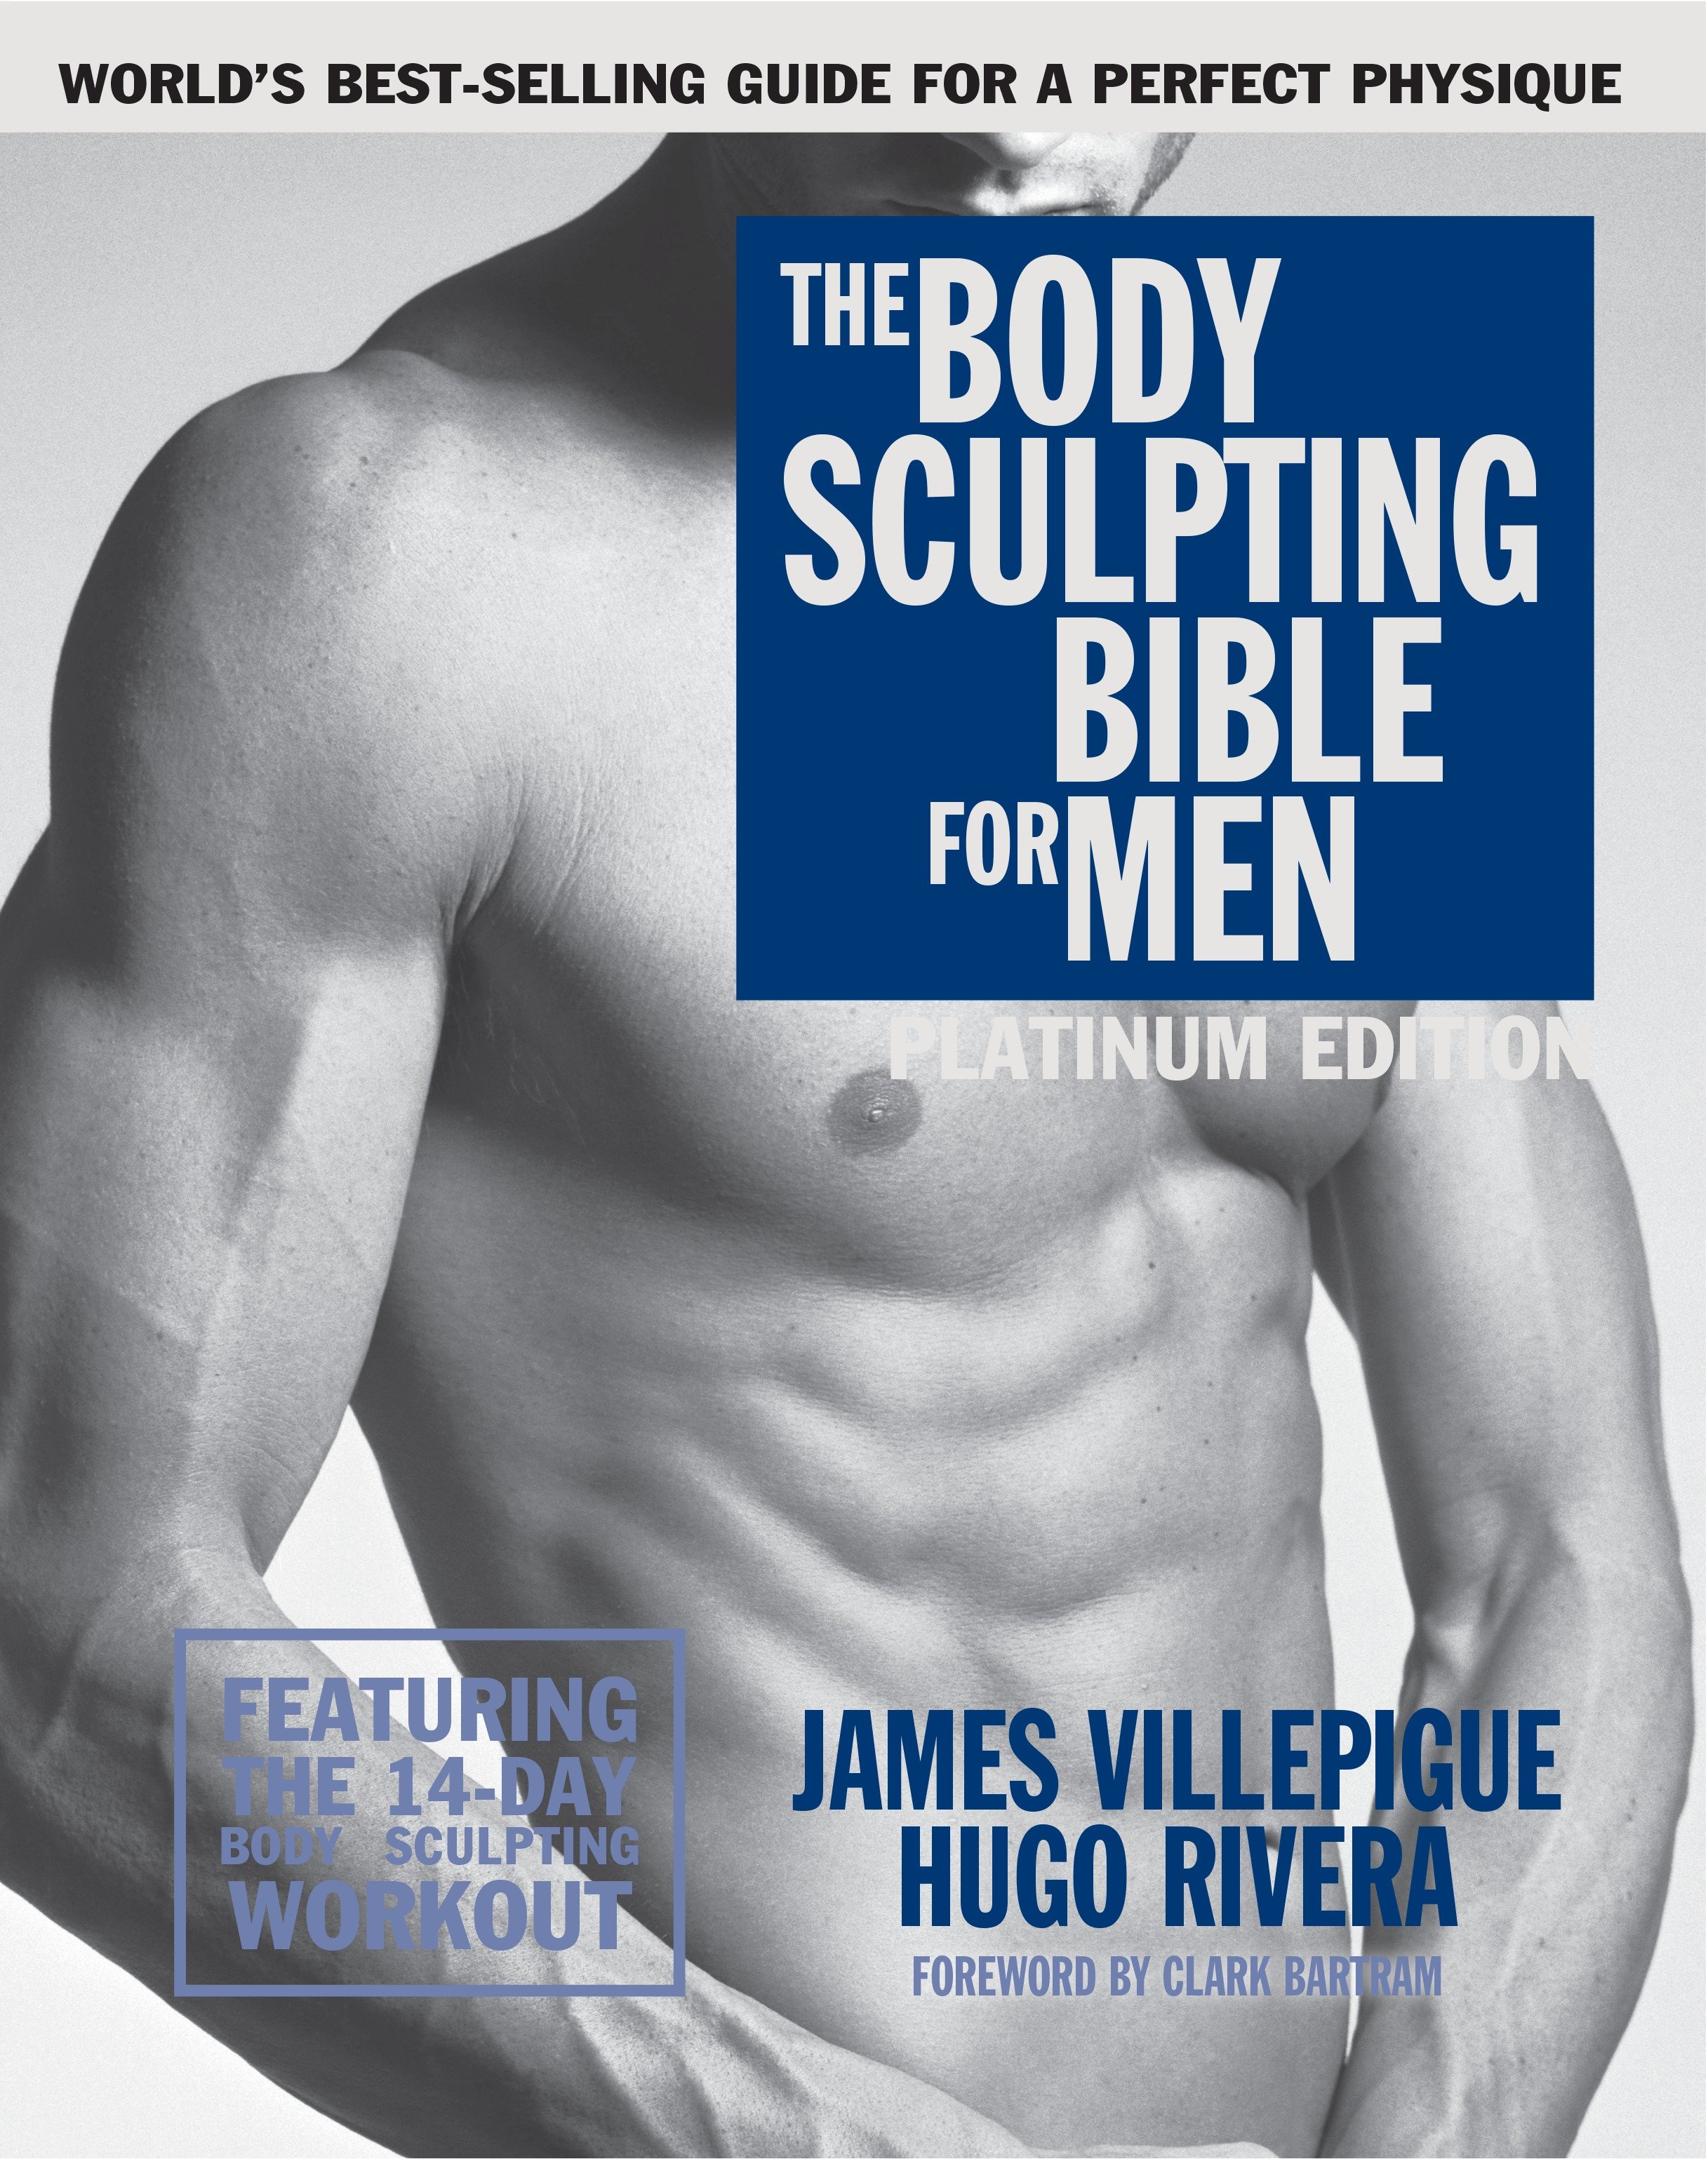 The body sculpting bible for men cover image